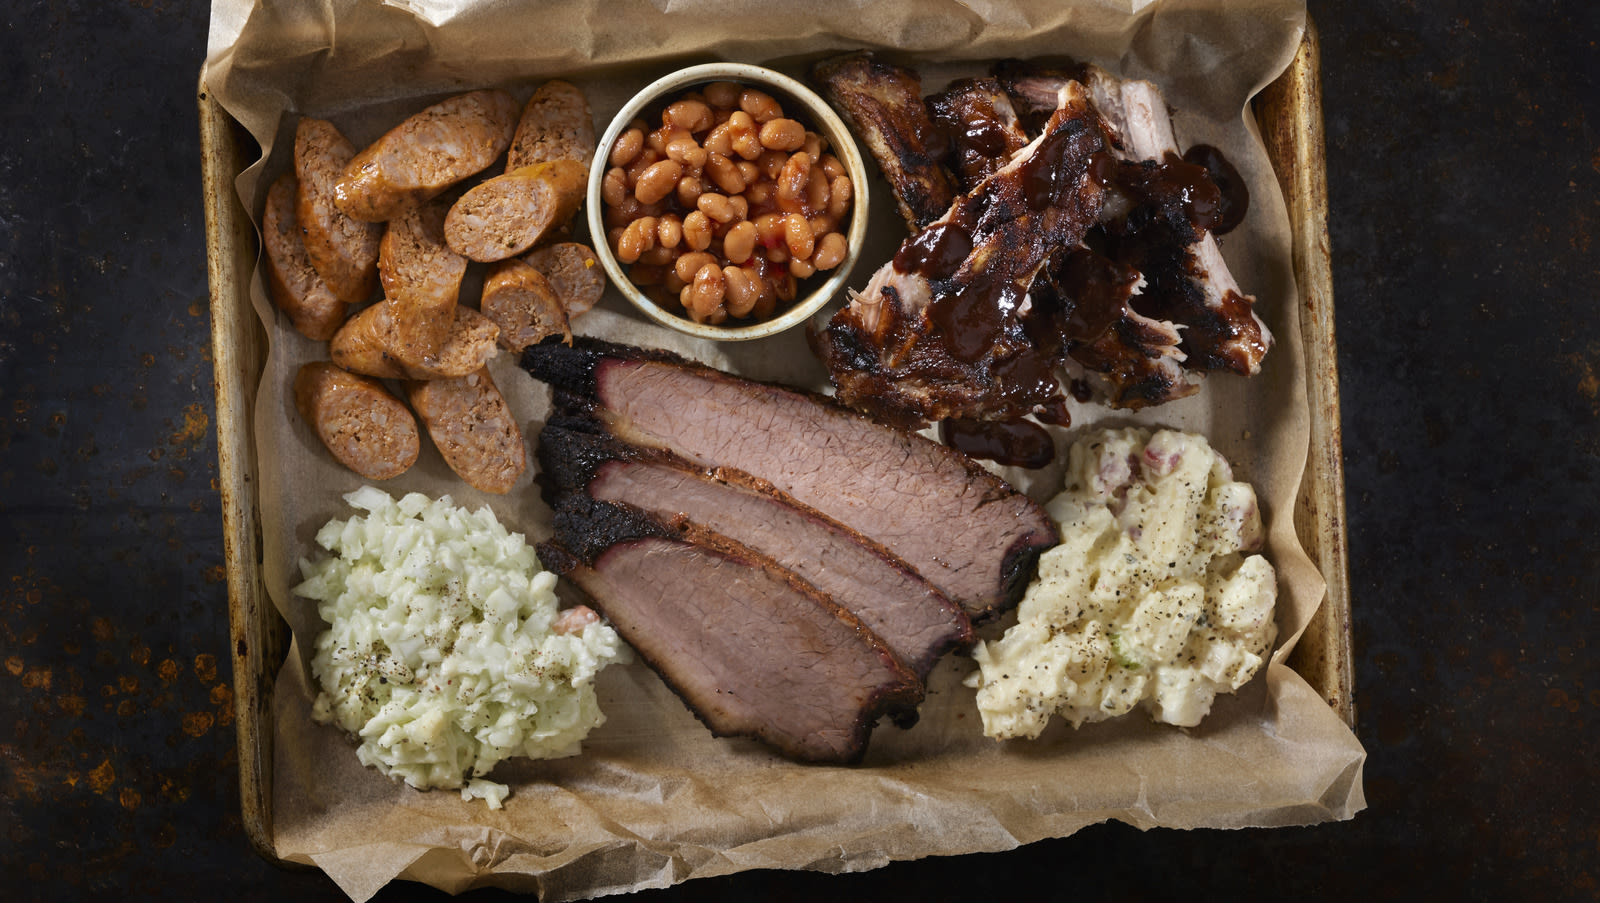 How To Tell The Quality Of A Barbecue Restaurant By Its Menu Offerings